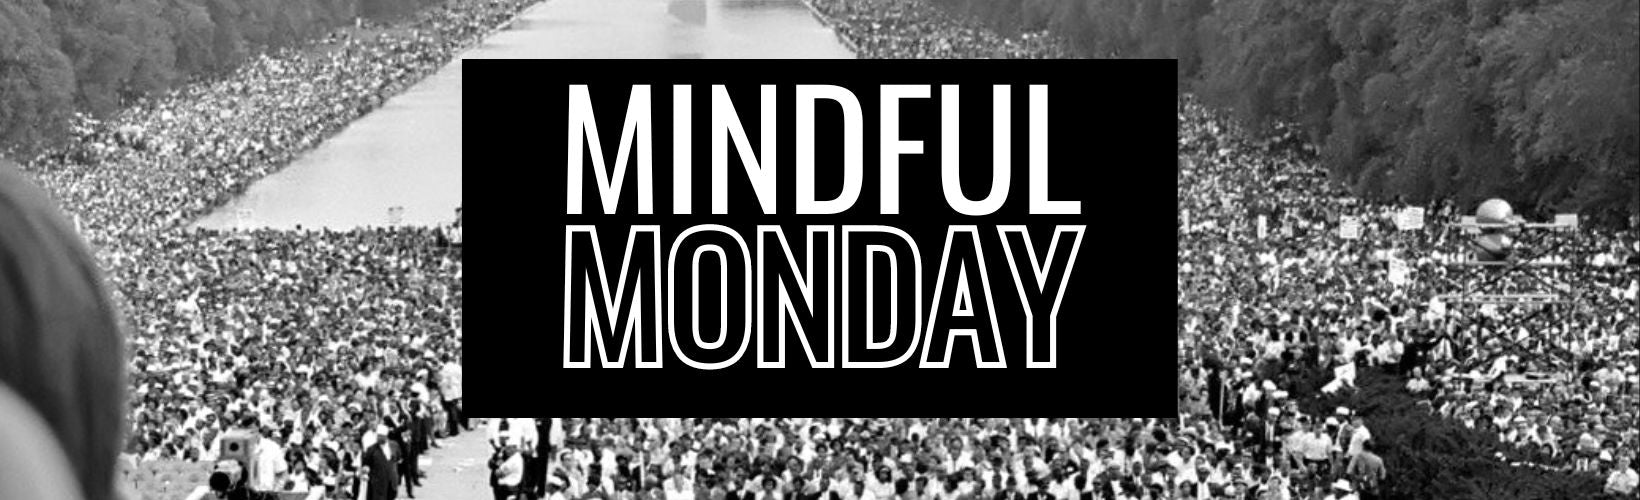 Mindful Monday: Martin Luther King's Legacy and the Transformative Power of Dreams